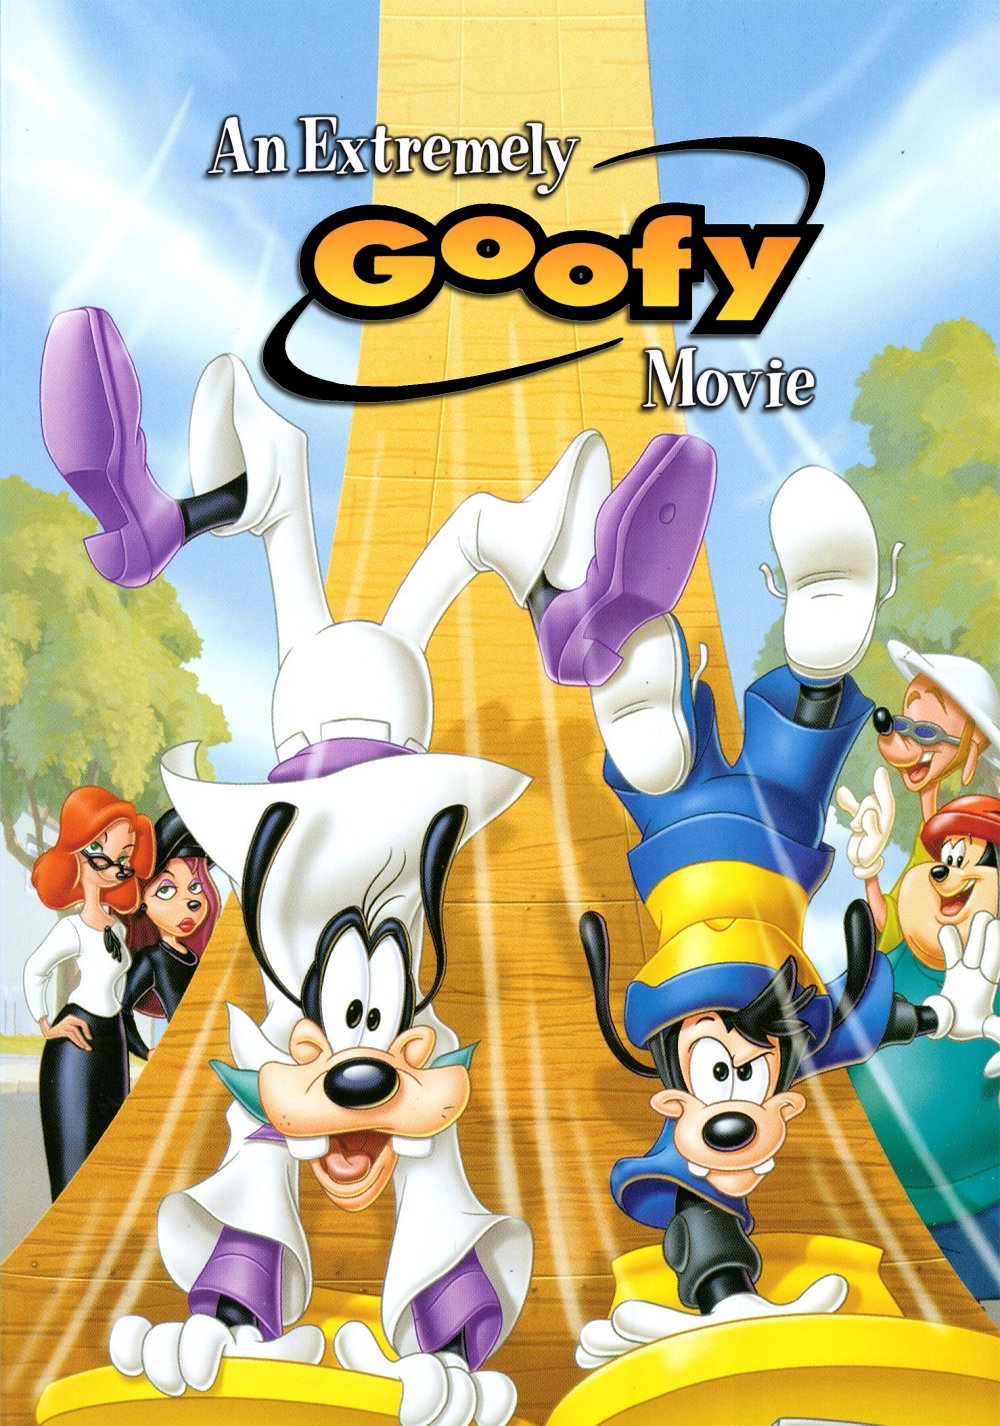 Poster of the movie An Extremely Goofy Movie